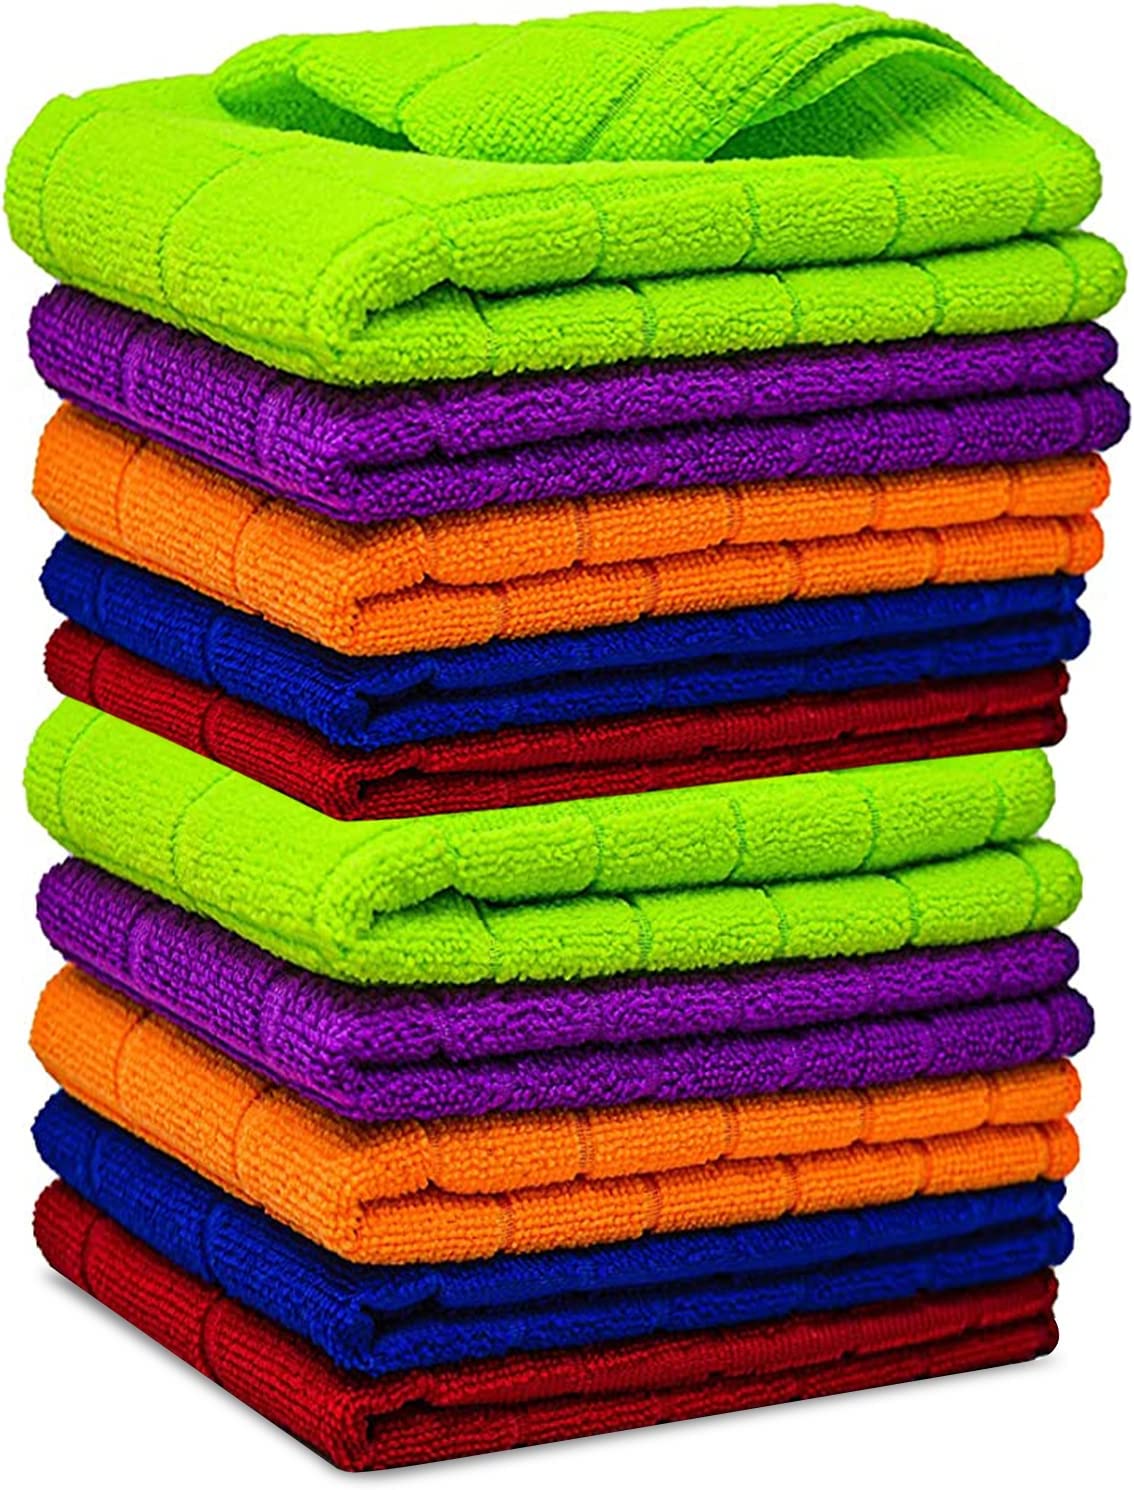 Microfibre-Janitorial-Cleaning-Cloths